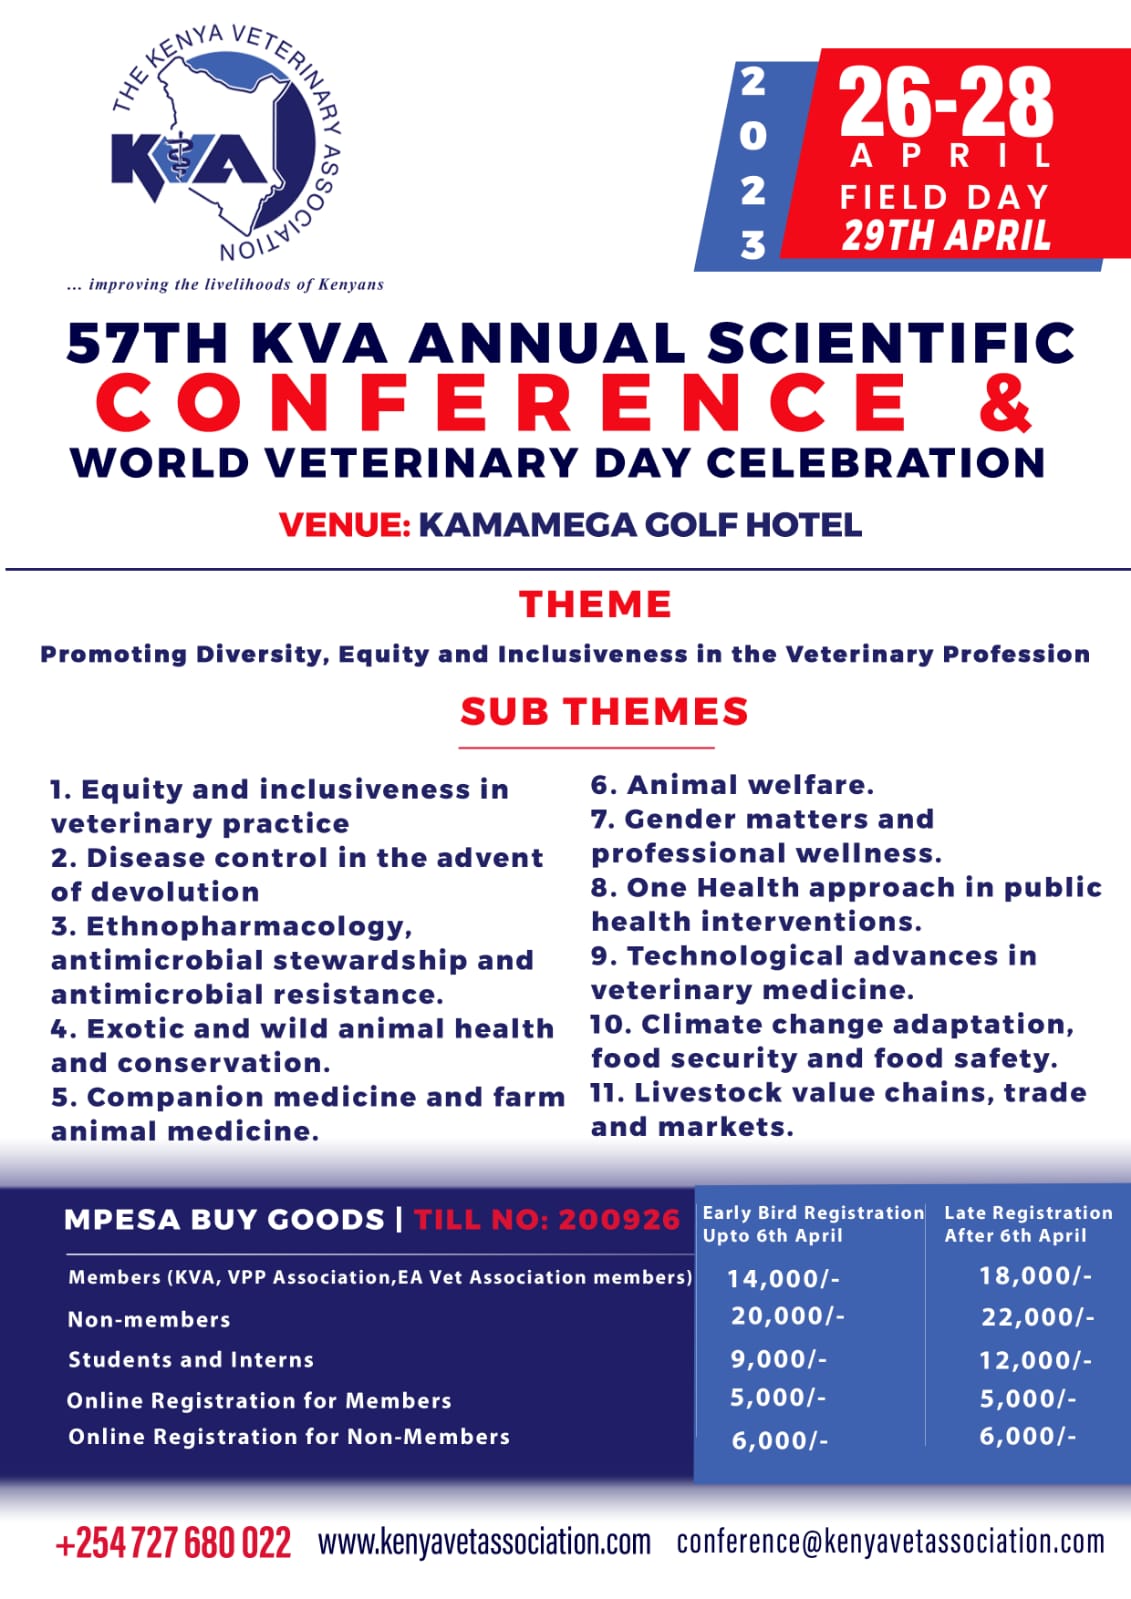 THE 57 KVA ANNUAL SCIETIFIC CONFERENCE AND WORLD VETERINARY DAY WILL BE HELD IN KAKAMEGA GOLF HOTEL FROM 26TH - 28TH APRIL,2023